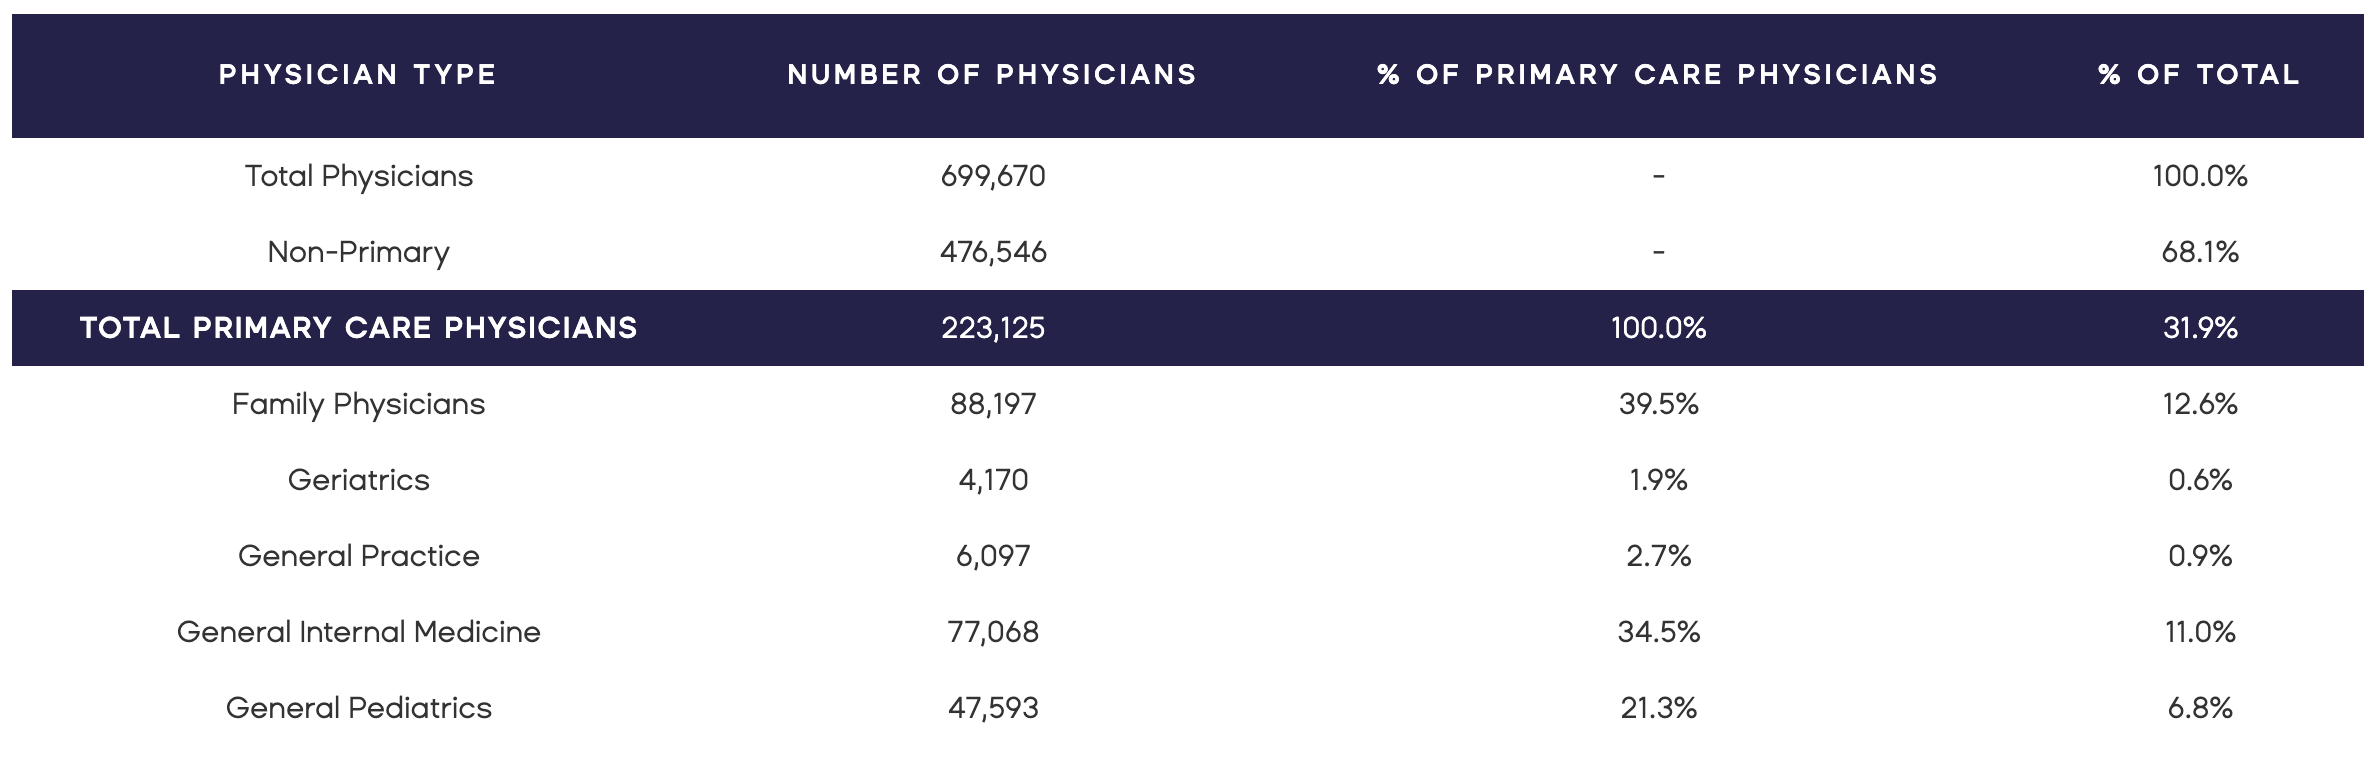 Primary Care Physicians - United States - American Medical Association